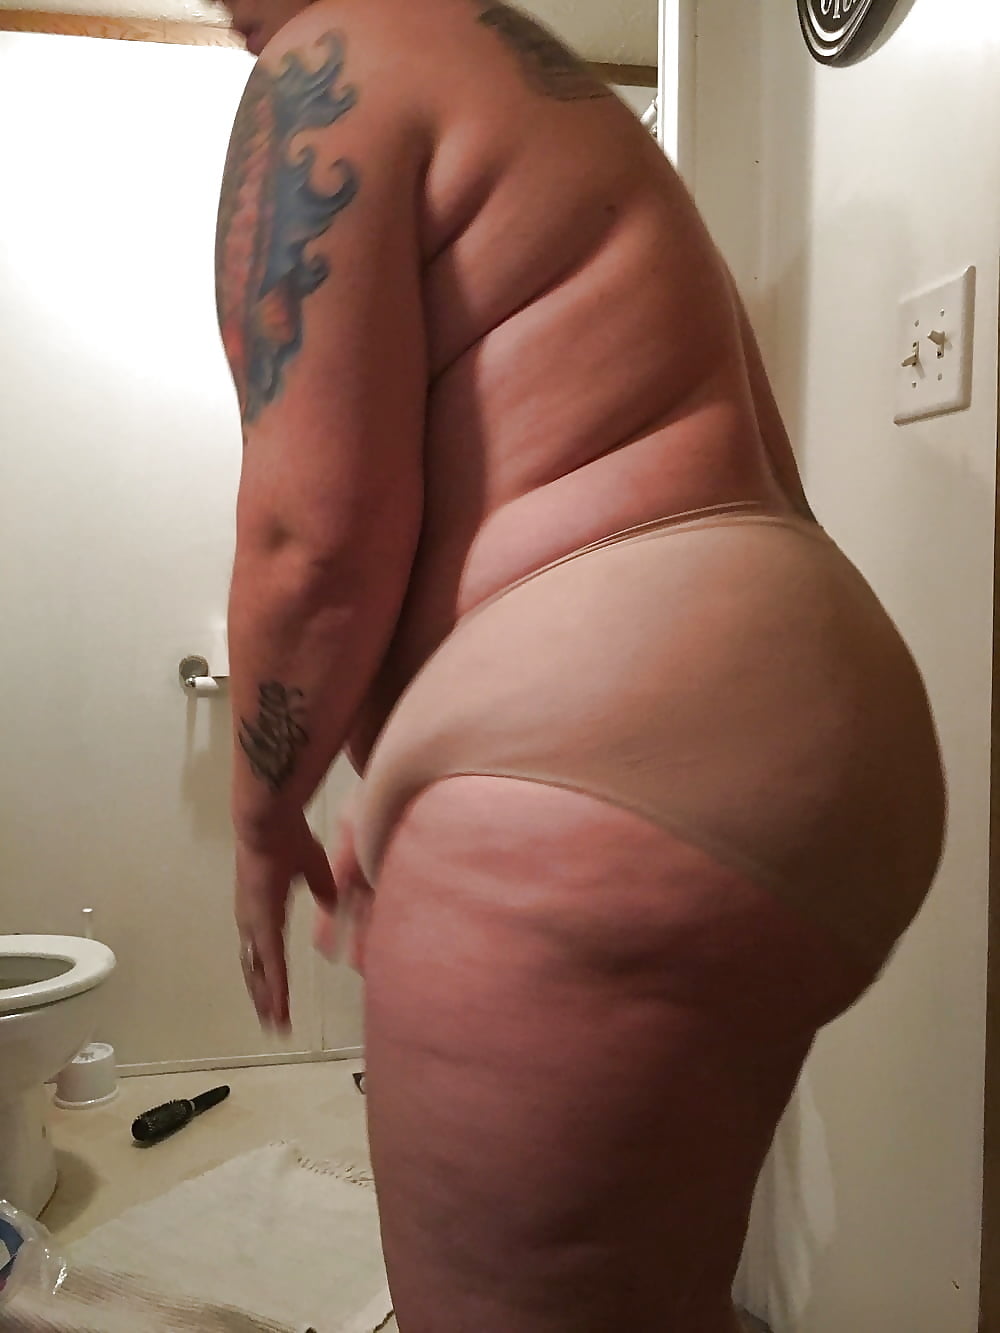 Chubby_Milf_s_I_Would_Love_to_Fuck (19/23)